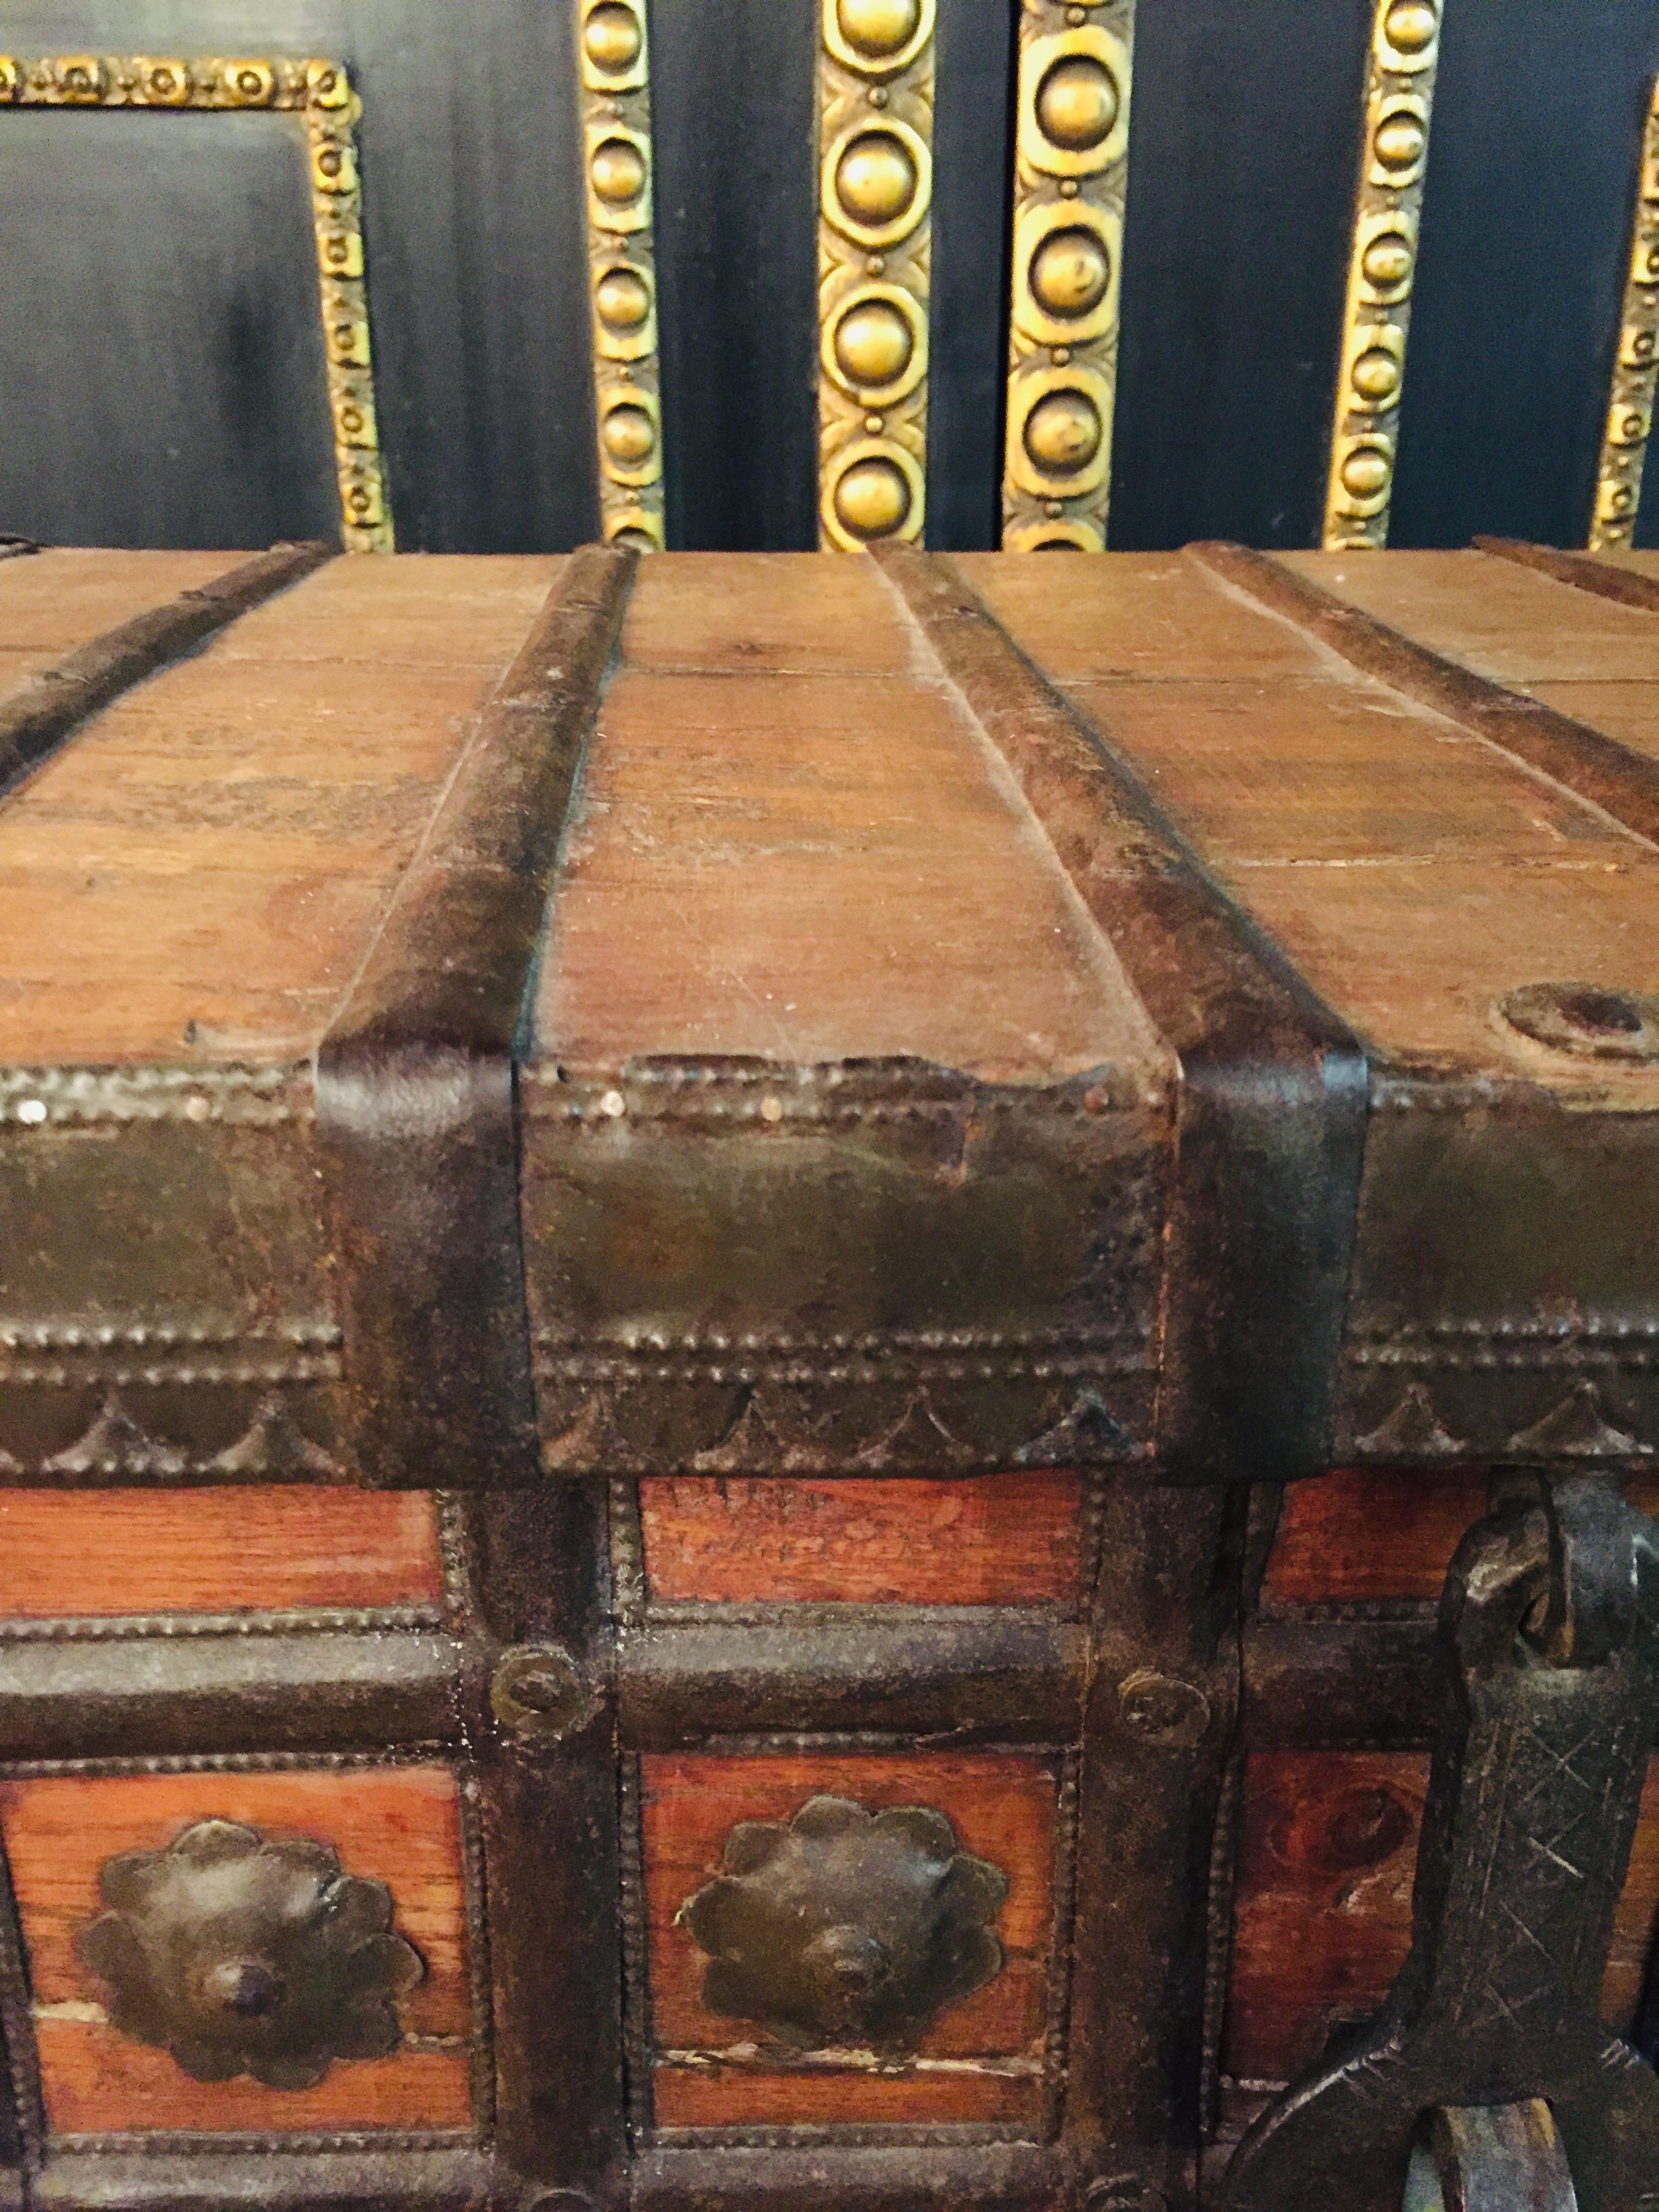 Cast Museale Antique Flat-Top Chest, circa 16th-17th Century